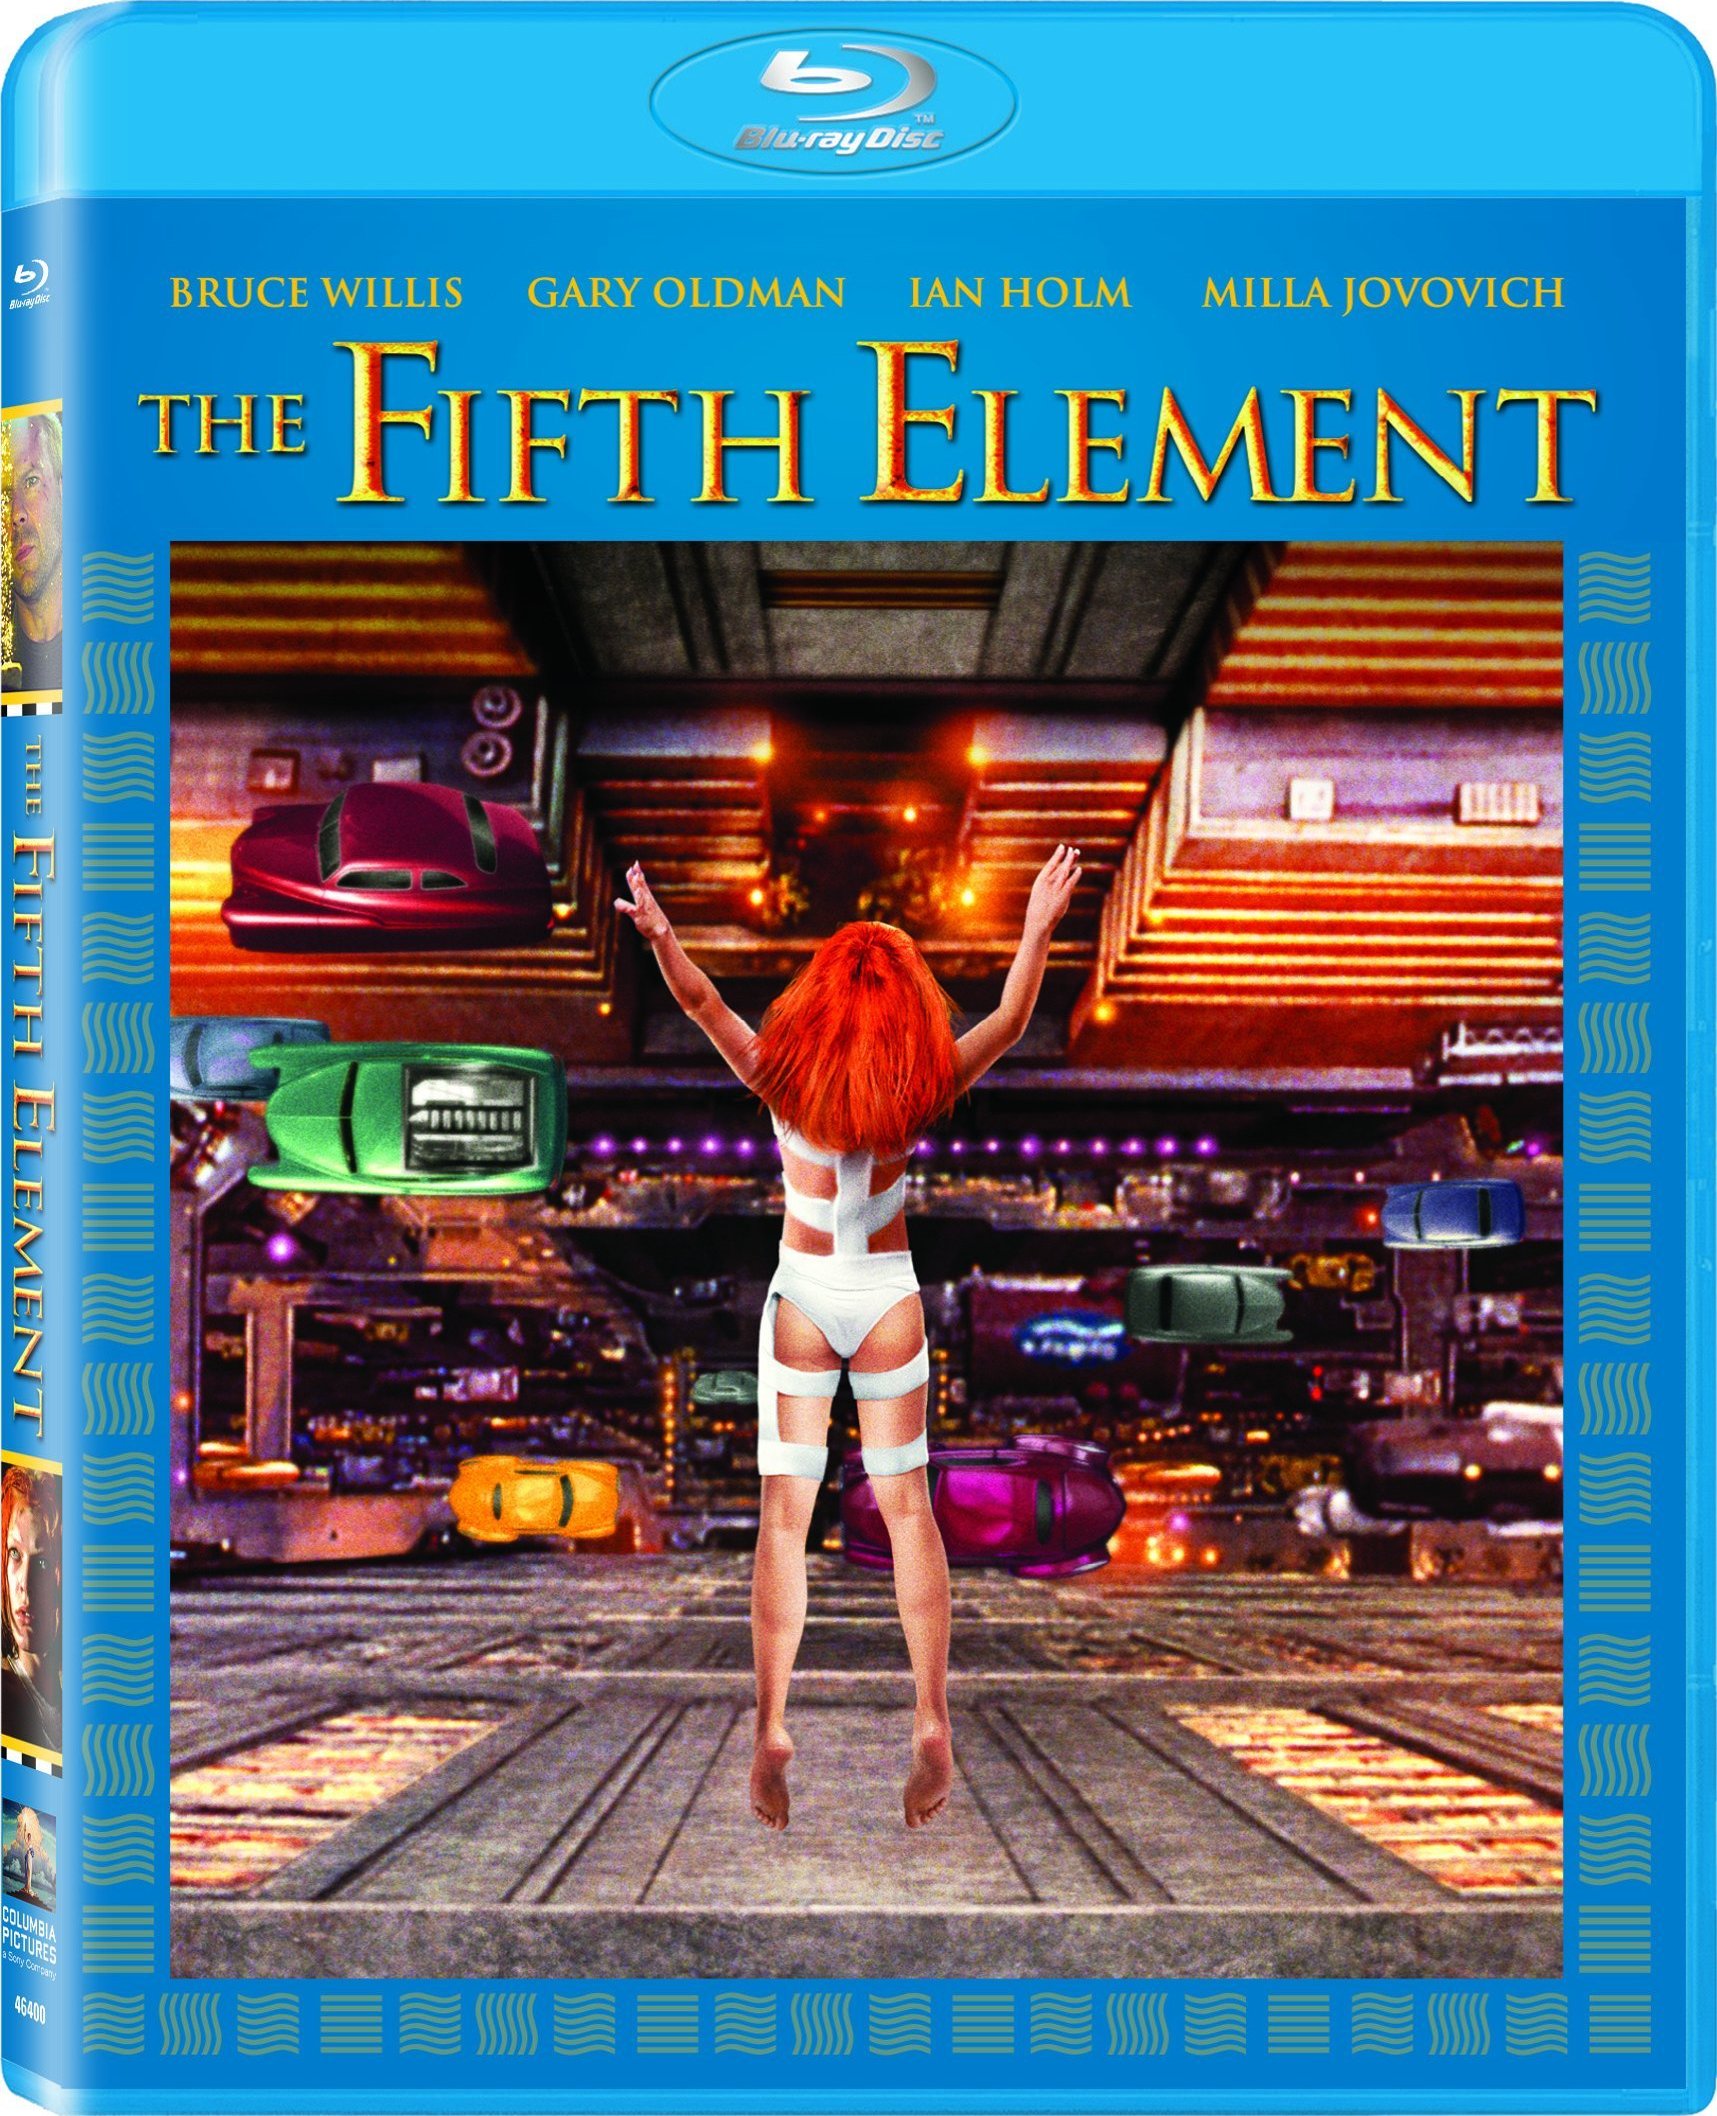 The Fifth Element (1997) El Quinto Elemento (1997) [AC3 5.1/2.0 + SUP/SRT] [Blu Ray-Rip] [DVD-RIP] 138634_front